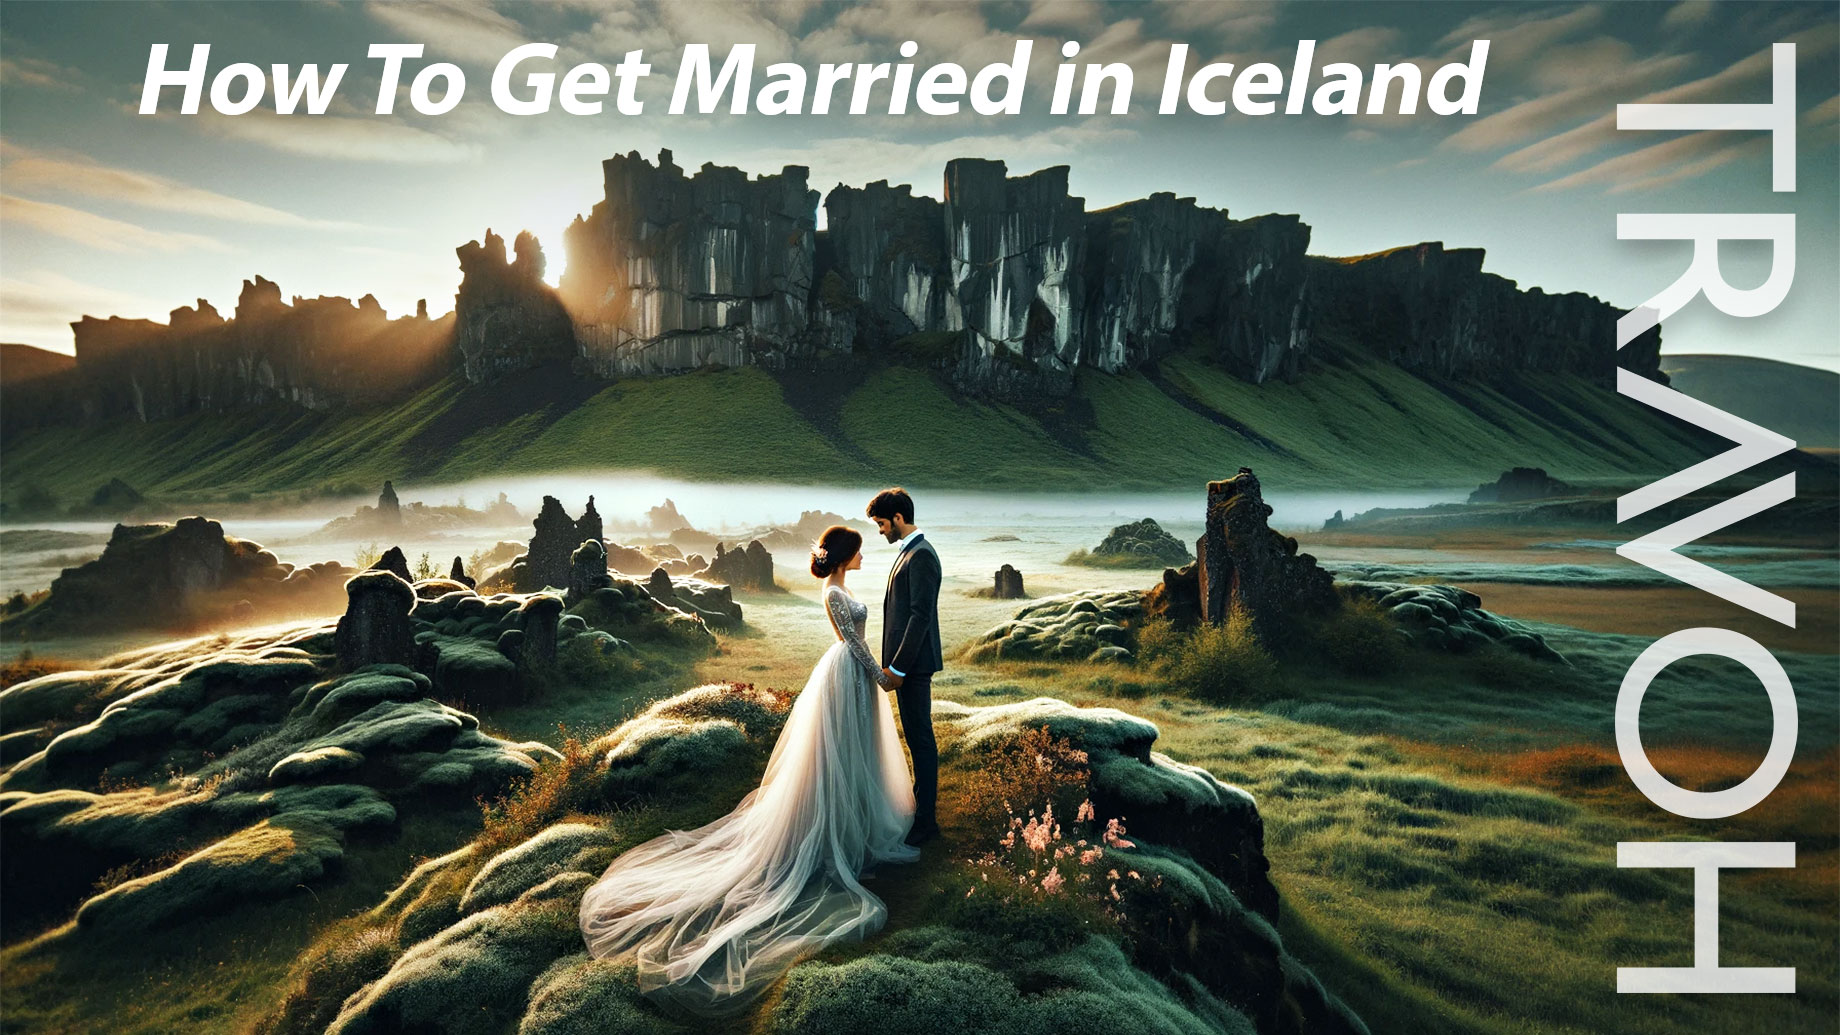 How To Get Married in Iceland